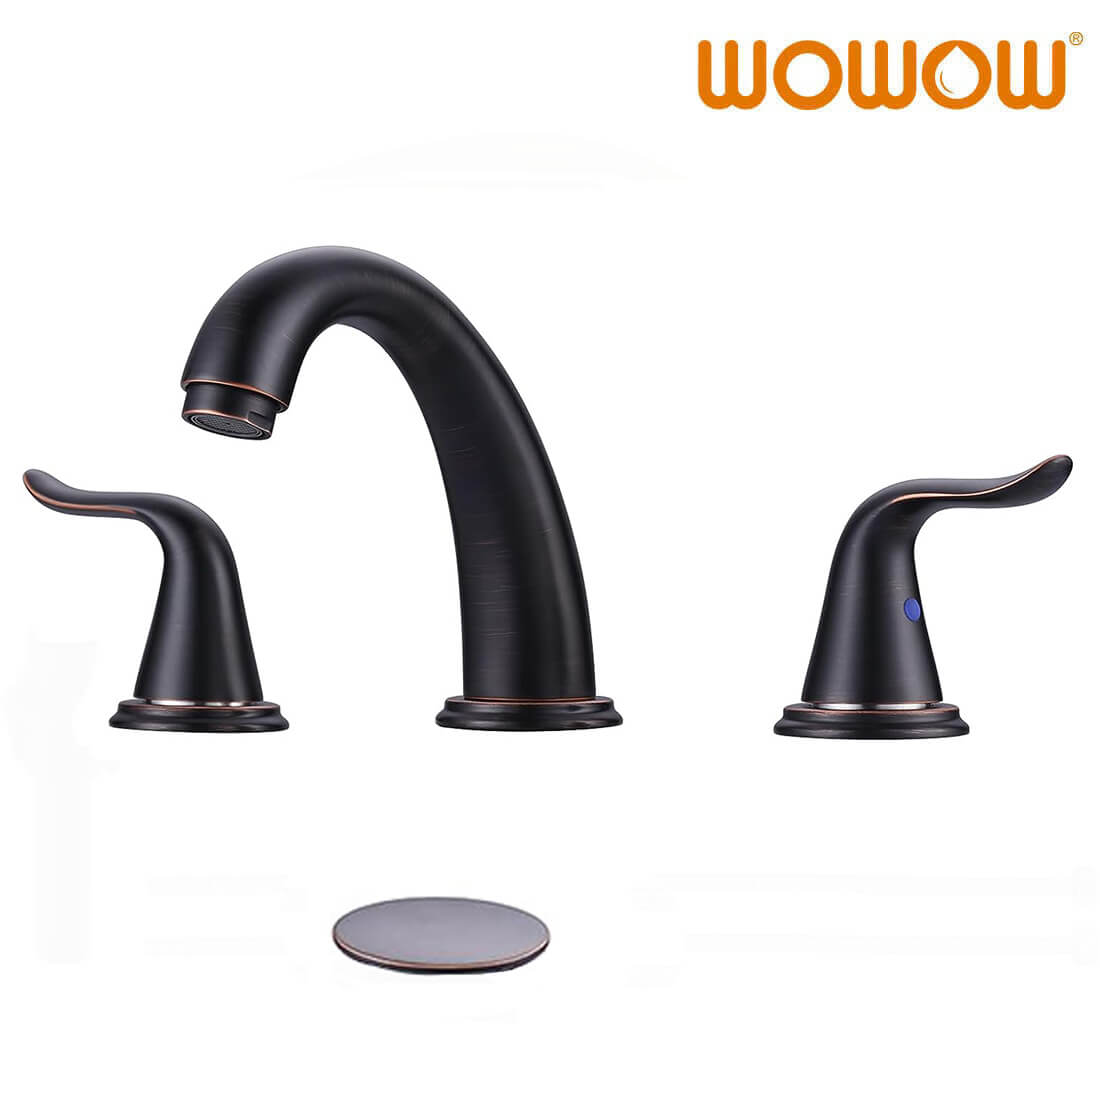 wowow 3 hole widespread oil rubbed bronze bathroom sink faucet 7